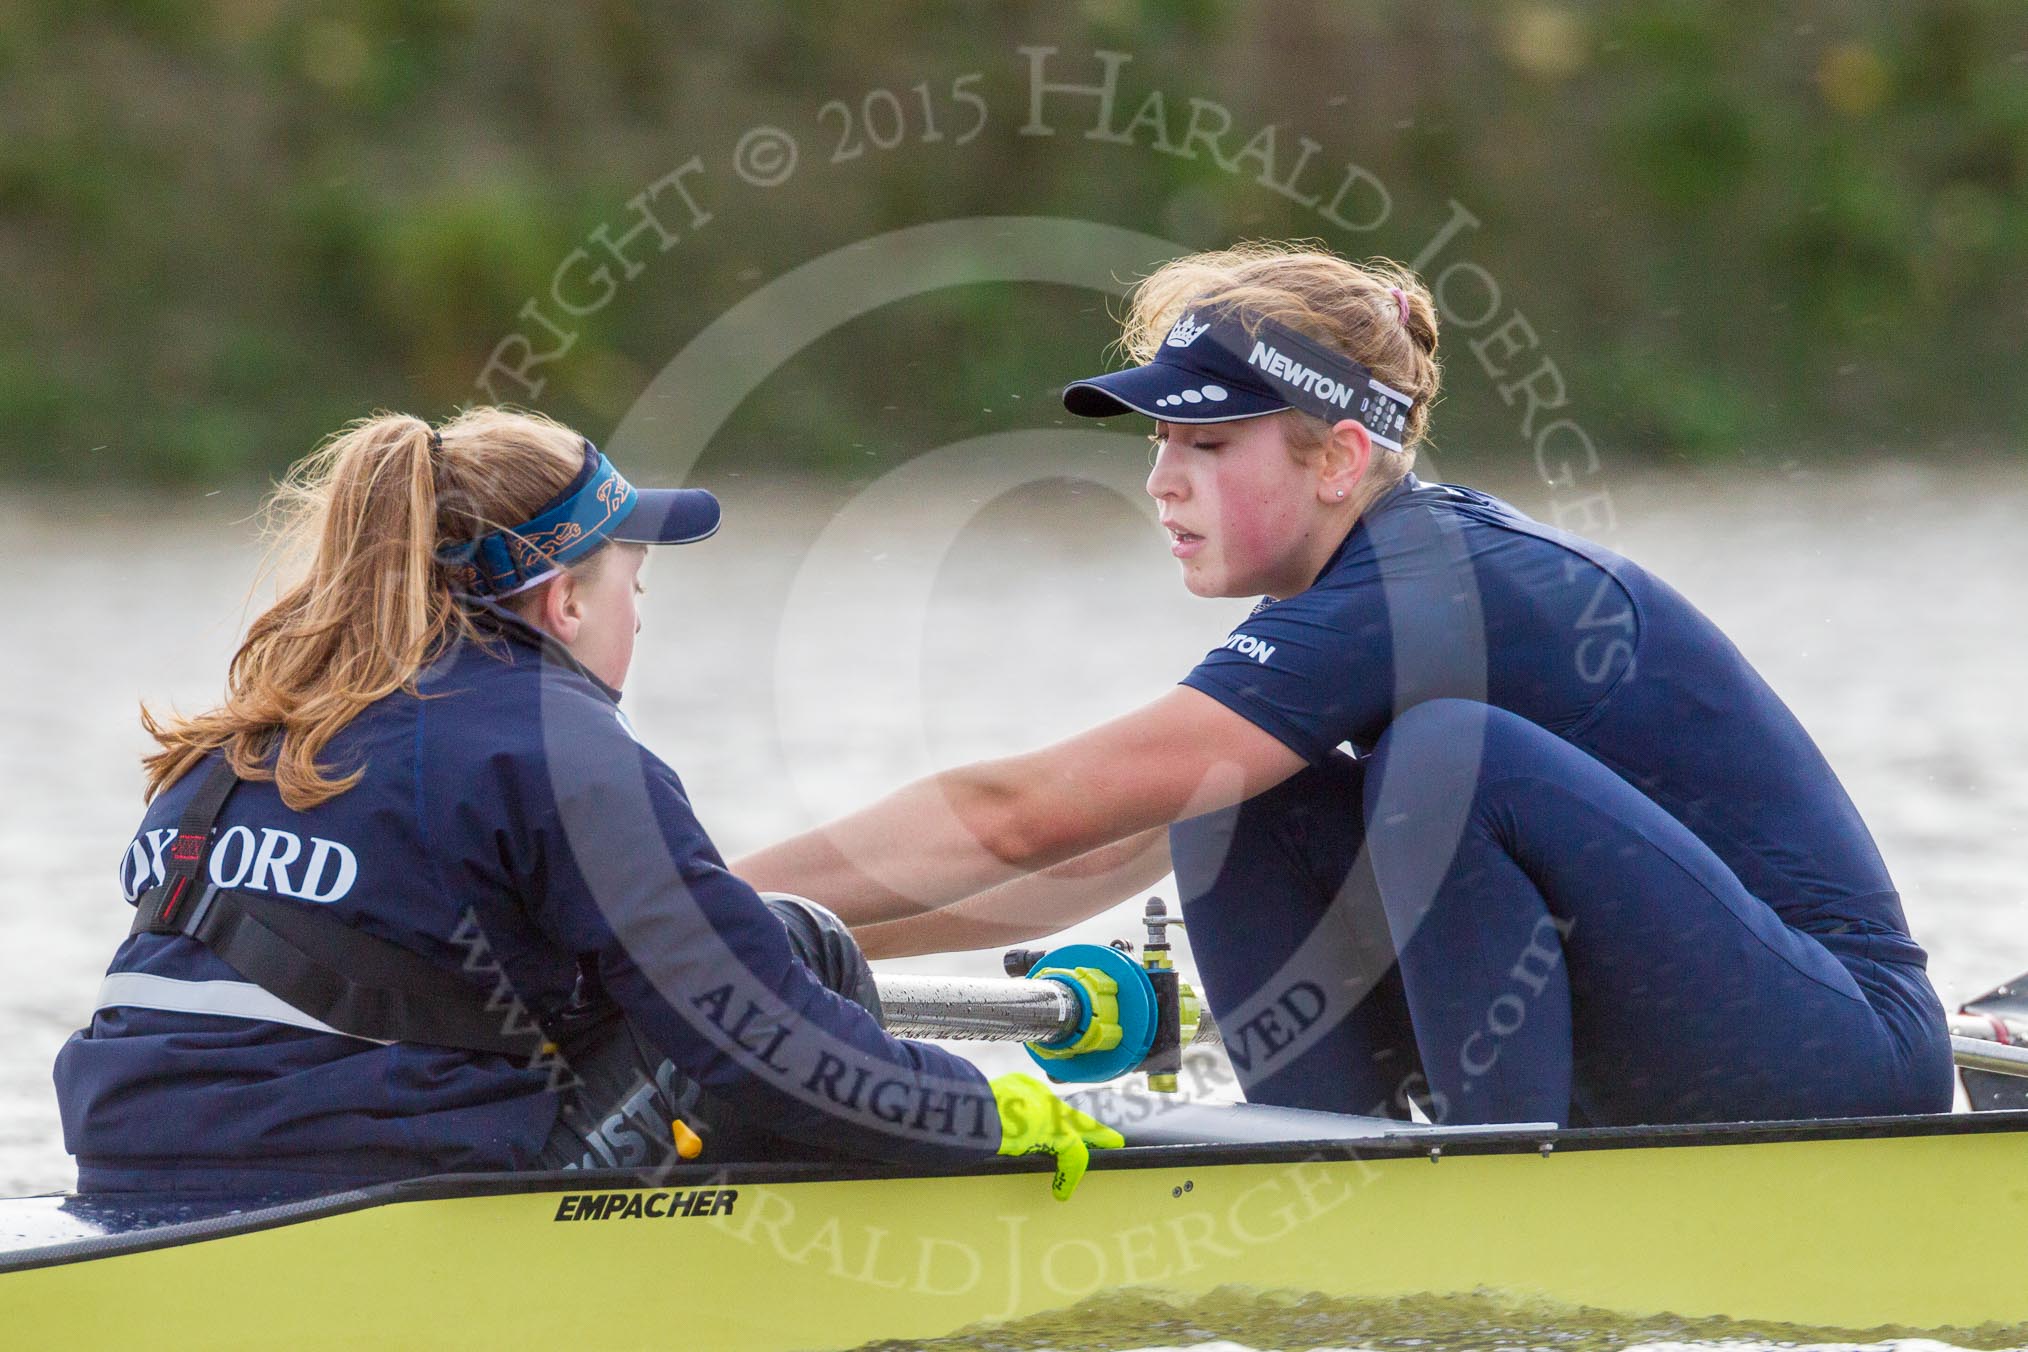 The Boat Race season 2016 - Women's Boat Race Trial Eights (OUWBC, Oxford): "Charybdis" , here Cox-Morgan Baynham-Williams, stroke-Kate Erickson.
River Thames between Putney Bridge and Mortlake,
London SW15,

United Kingdom,
on 10 December 2015 at 12:28, image #244